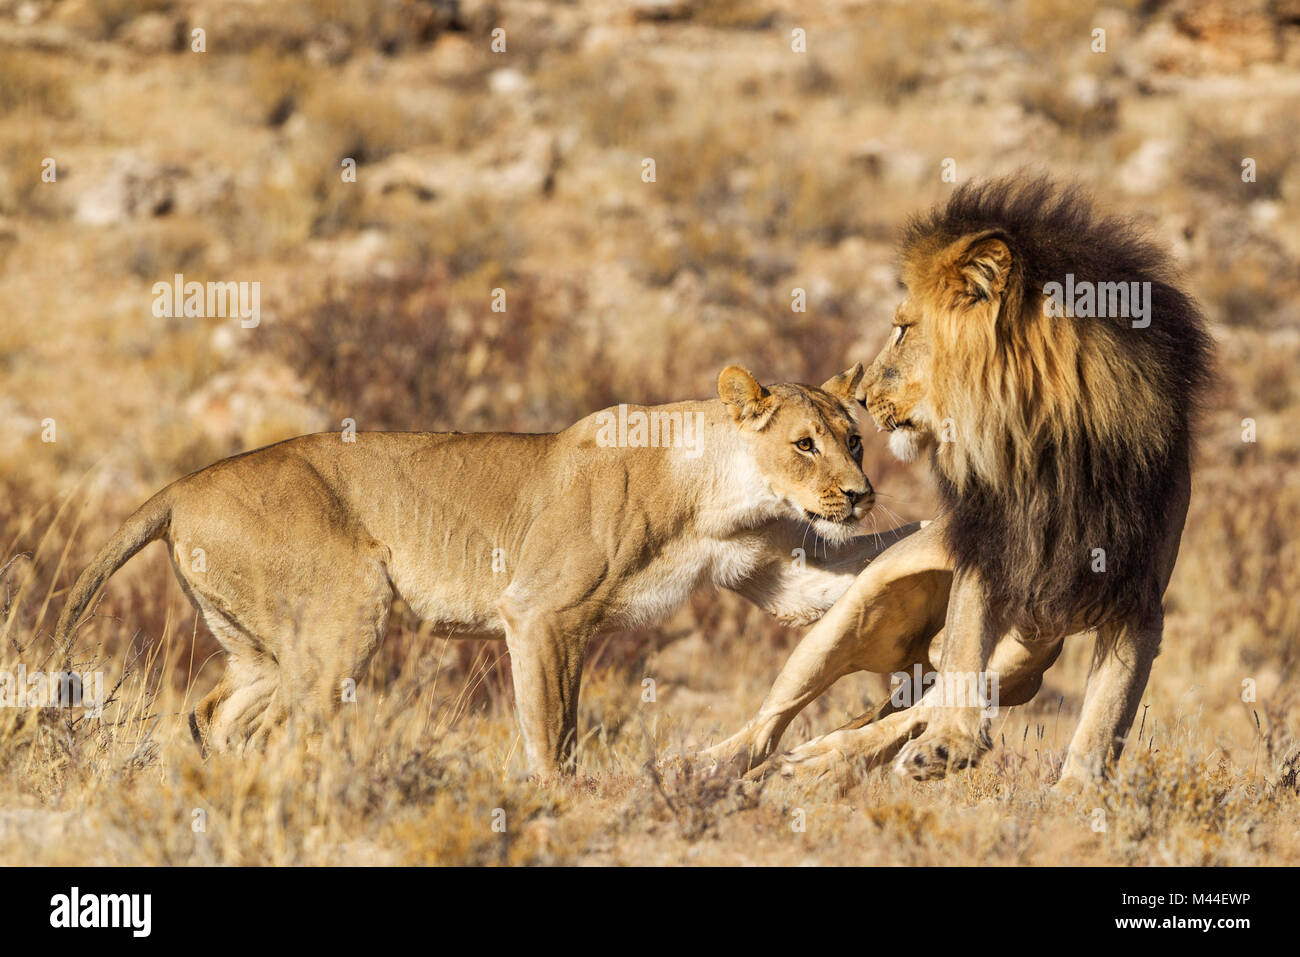 African Lion (Panthera leo). Female in heat and black-maned Kalahari male at their first encounter. The male is scared of the initially aggressive behaviour of the female. Kalahari Desert, Kgalagadi Transfrontier Park, South Africa. Stock Photo